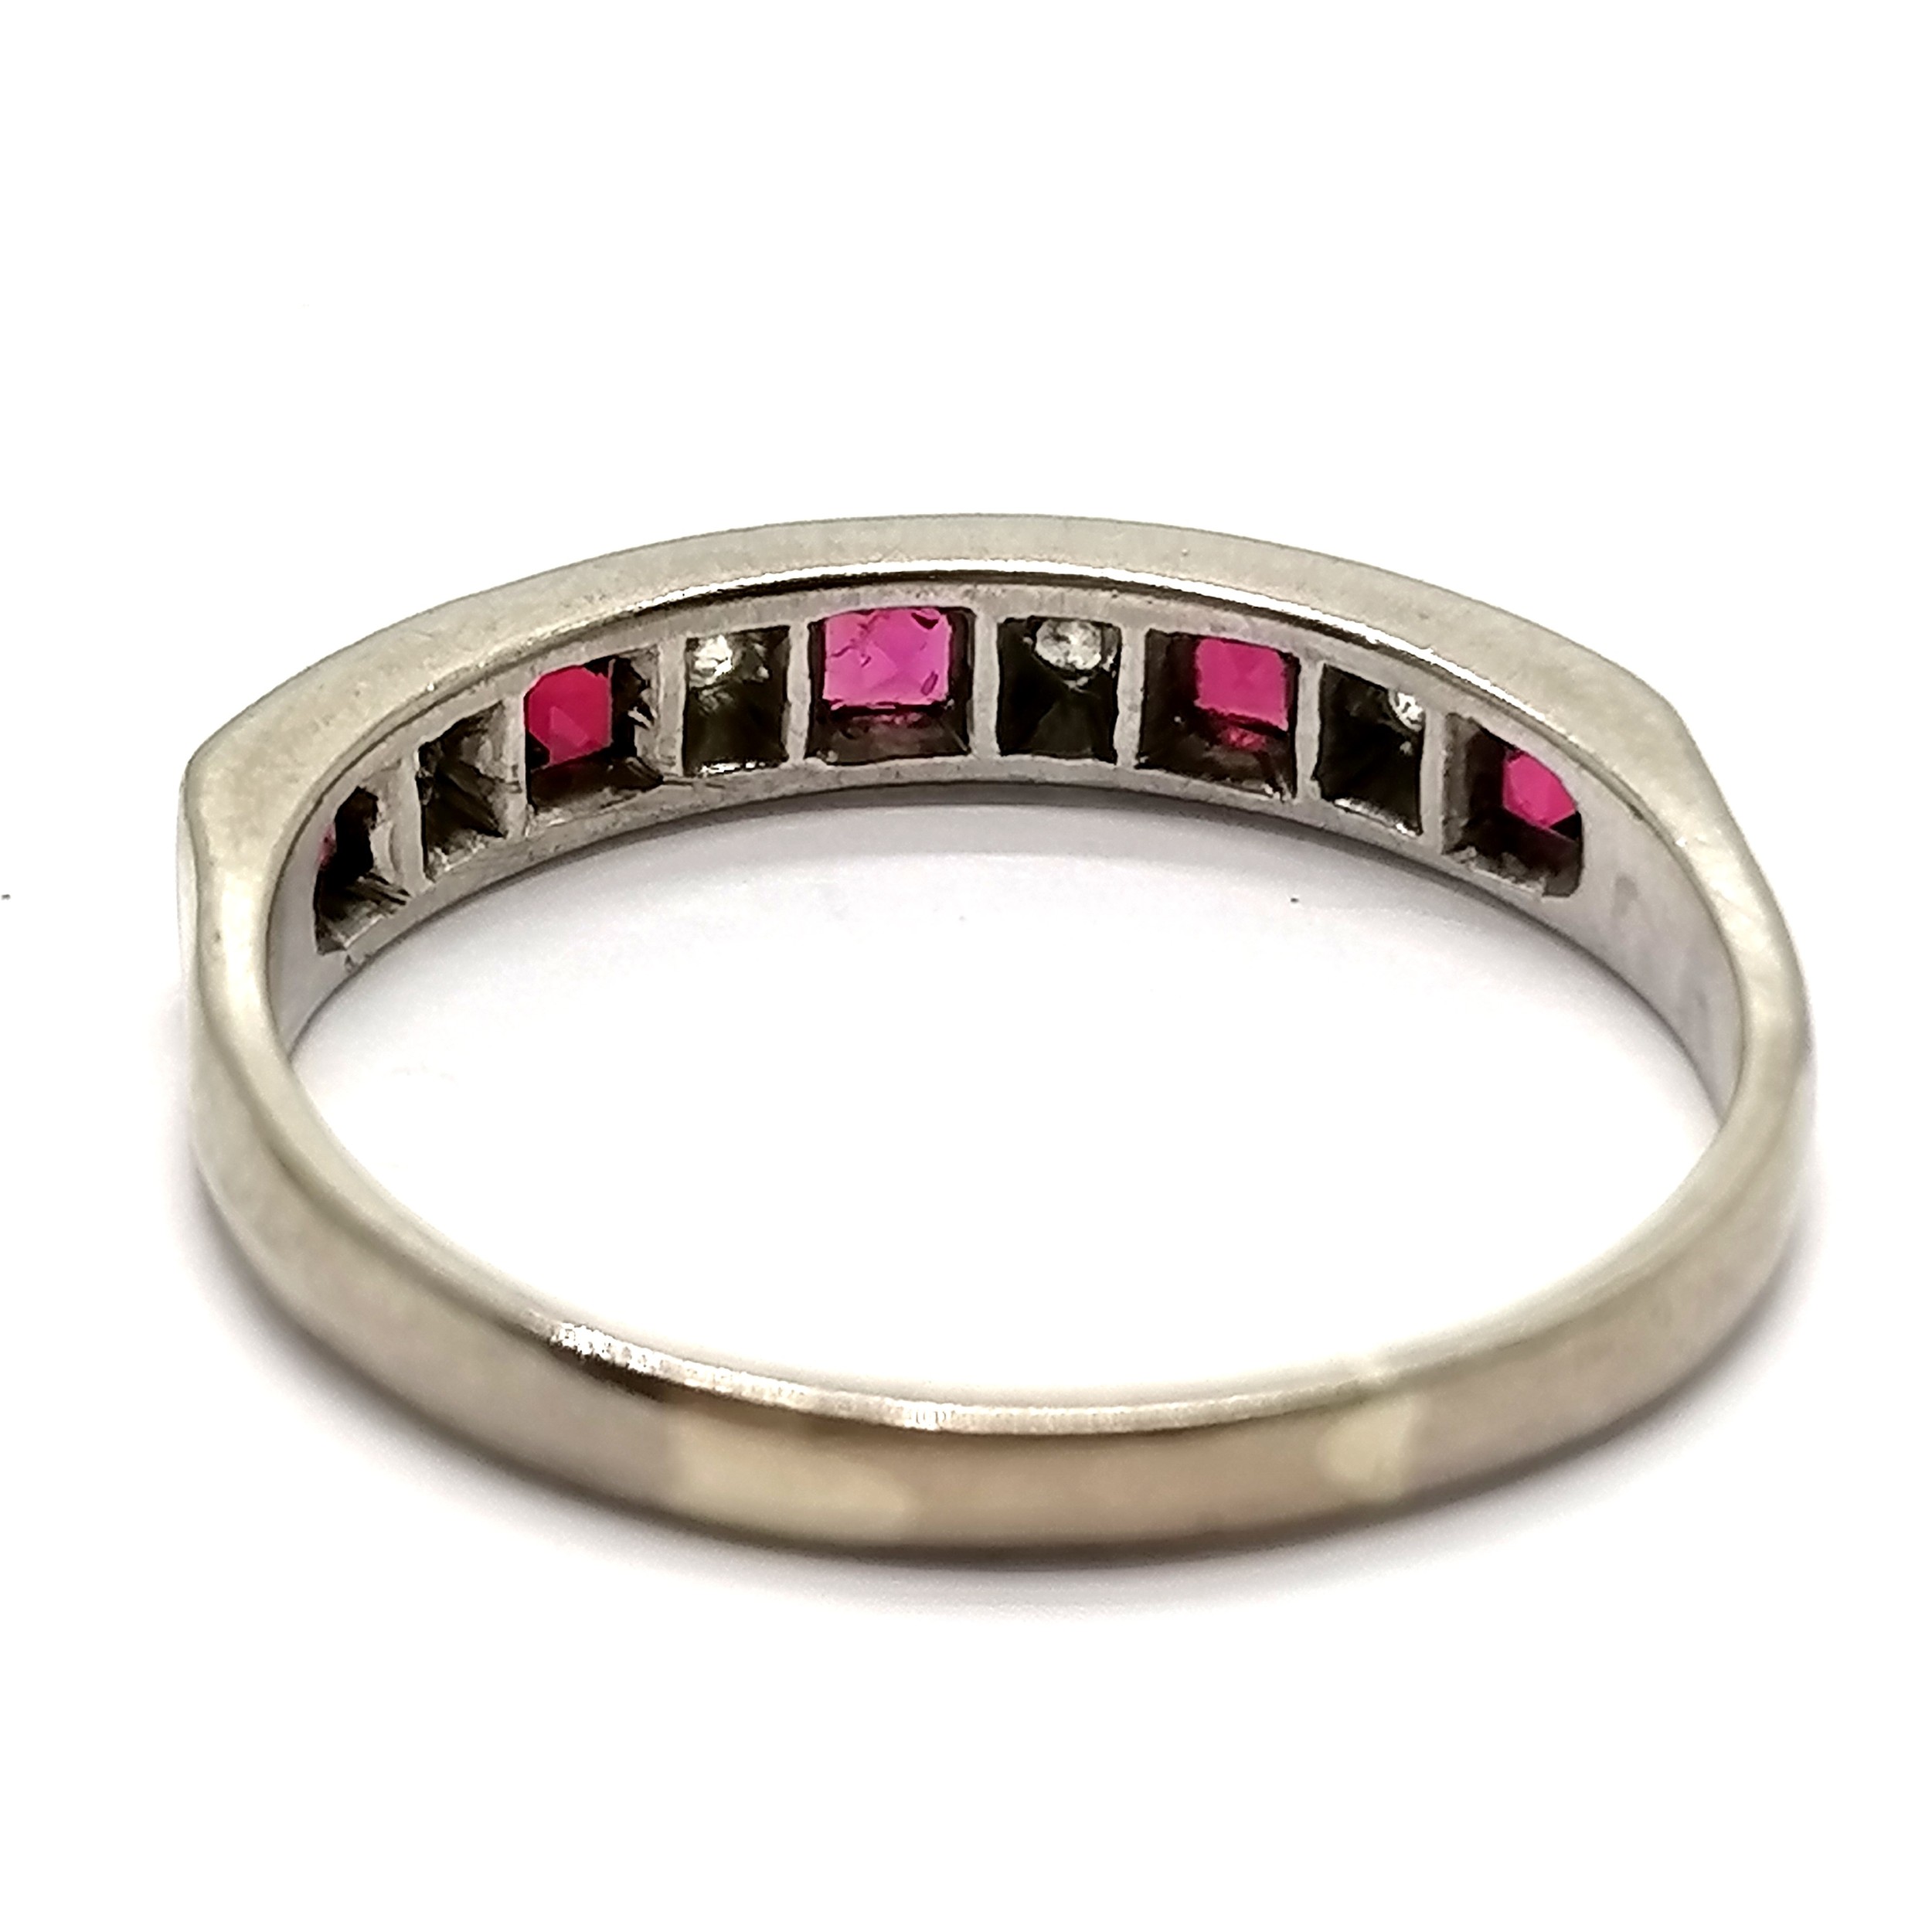 18ct marked white gold ruby / diamond half eternity ring - size V & 4.4g total weight - Image 2 of 3